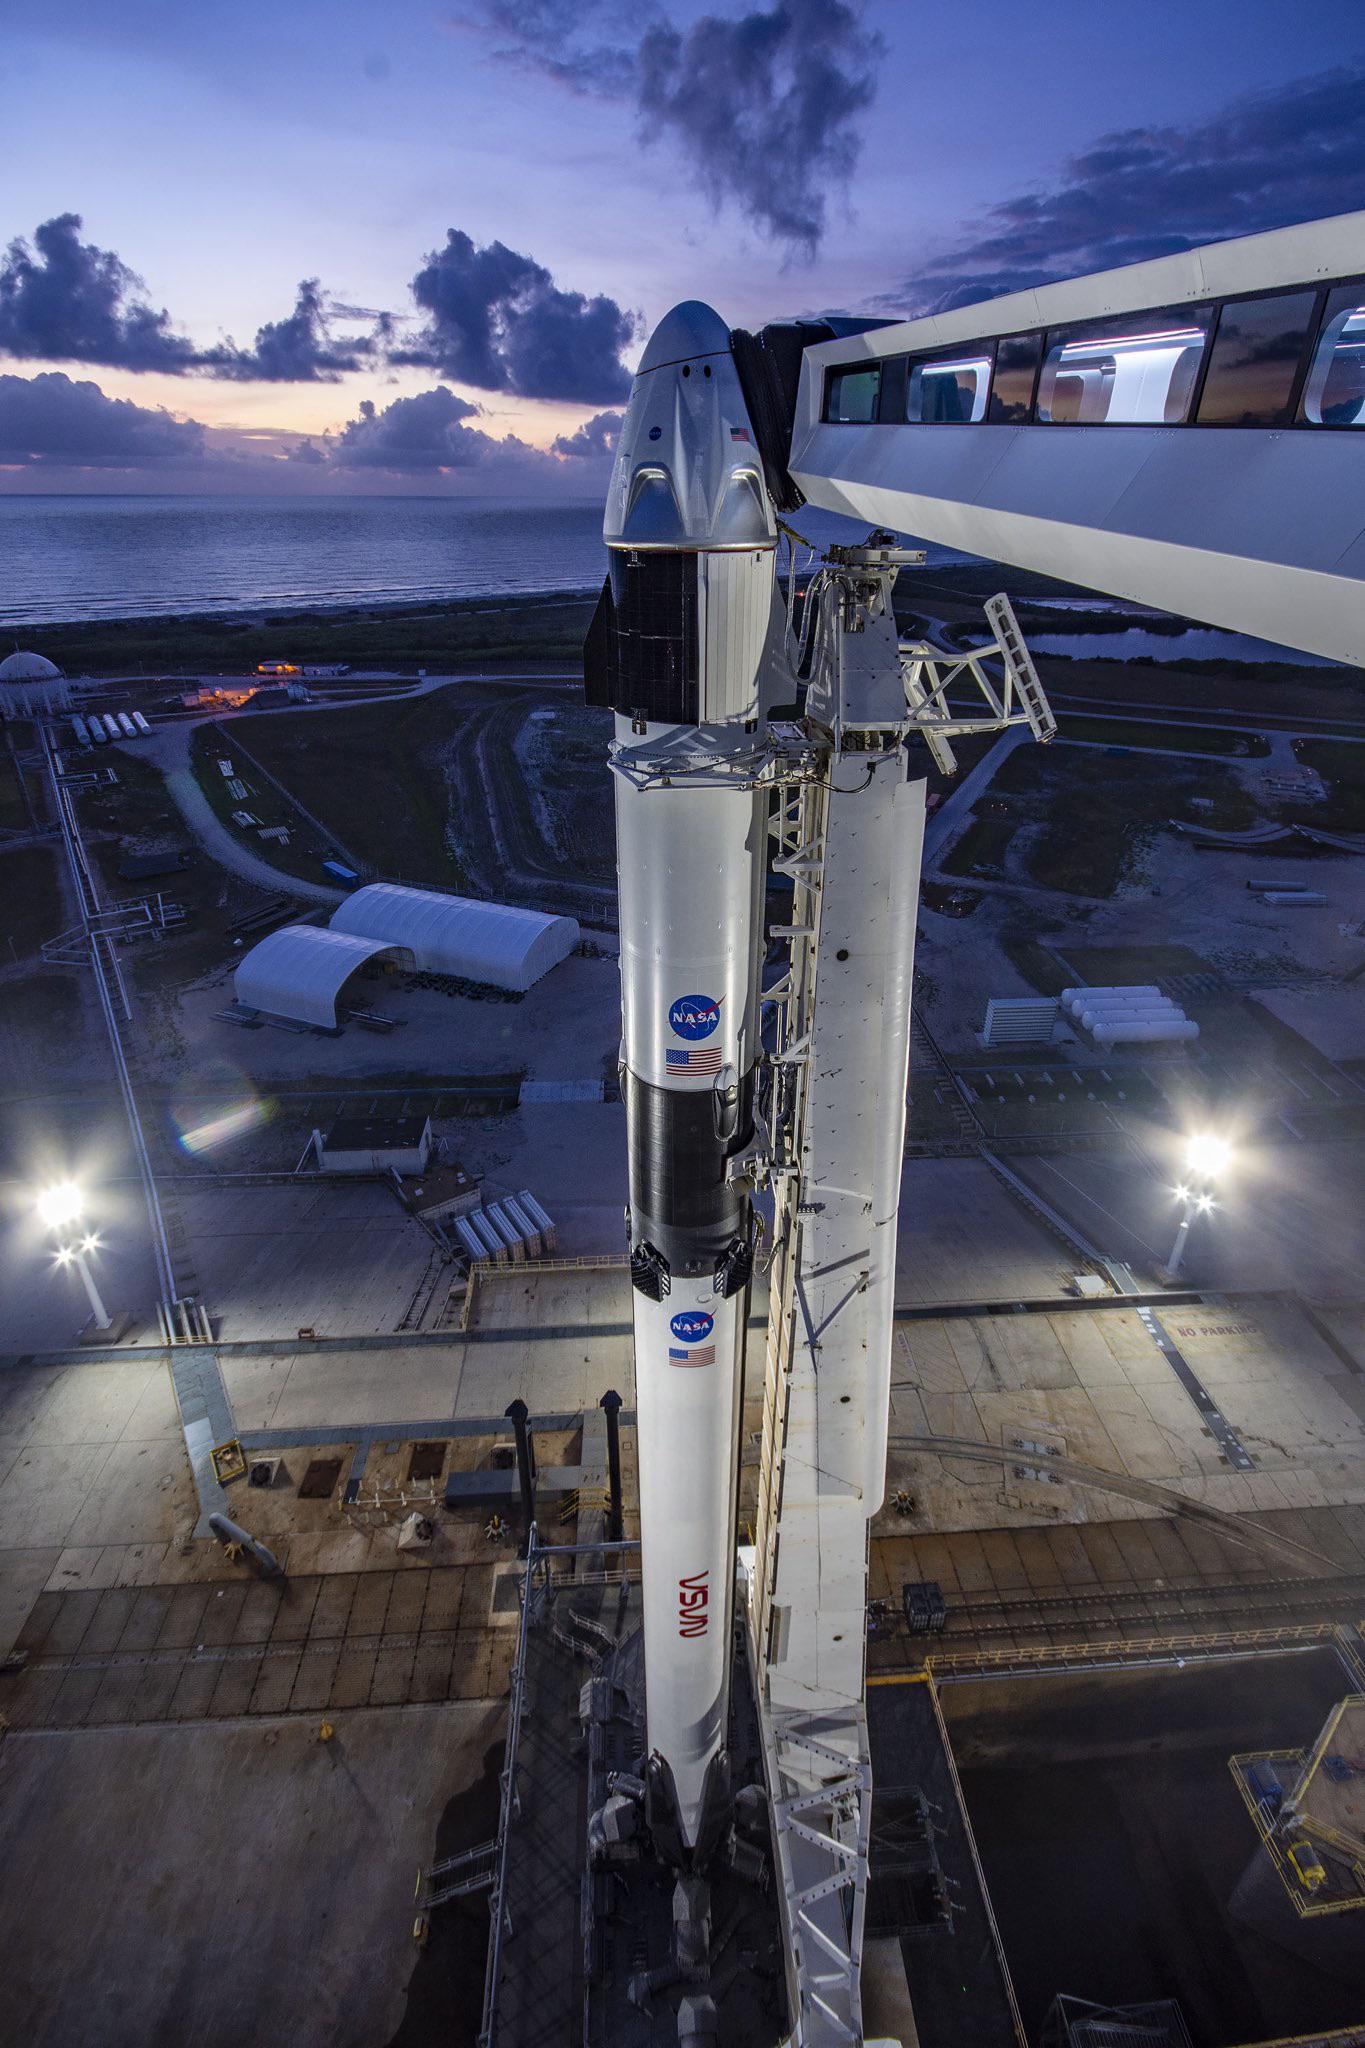 SpaceX's Falcon 9 and Crew Dragon on the launch pad